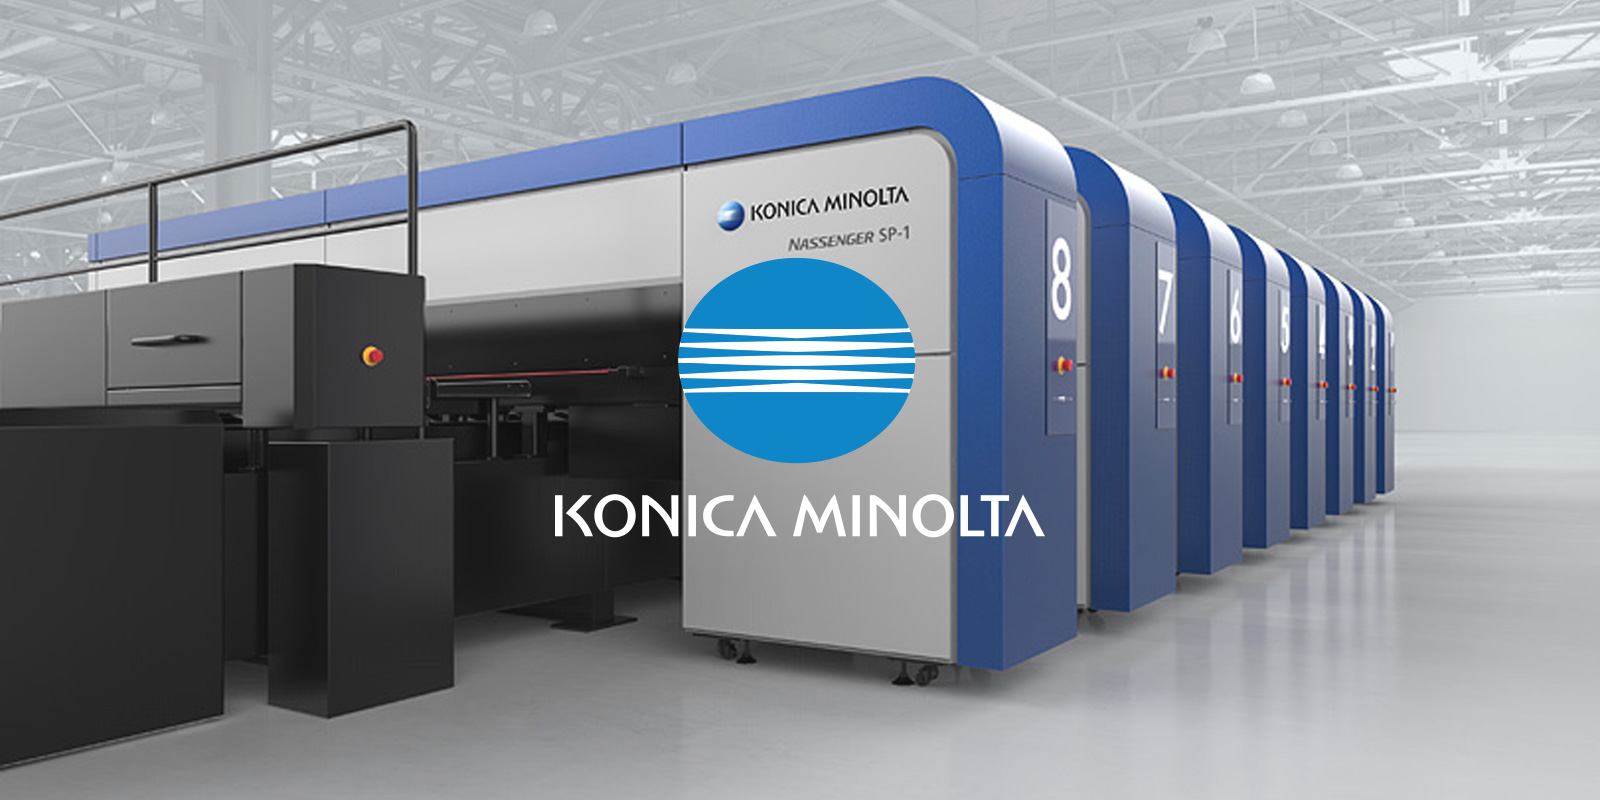 Business technology giant Konica Minolta hit by new ransomware